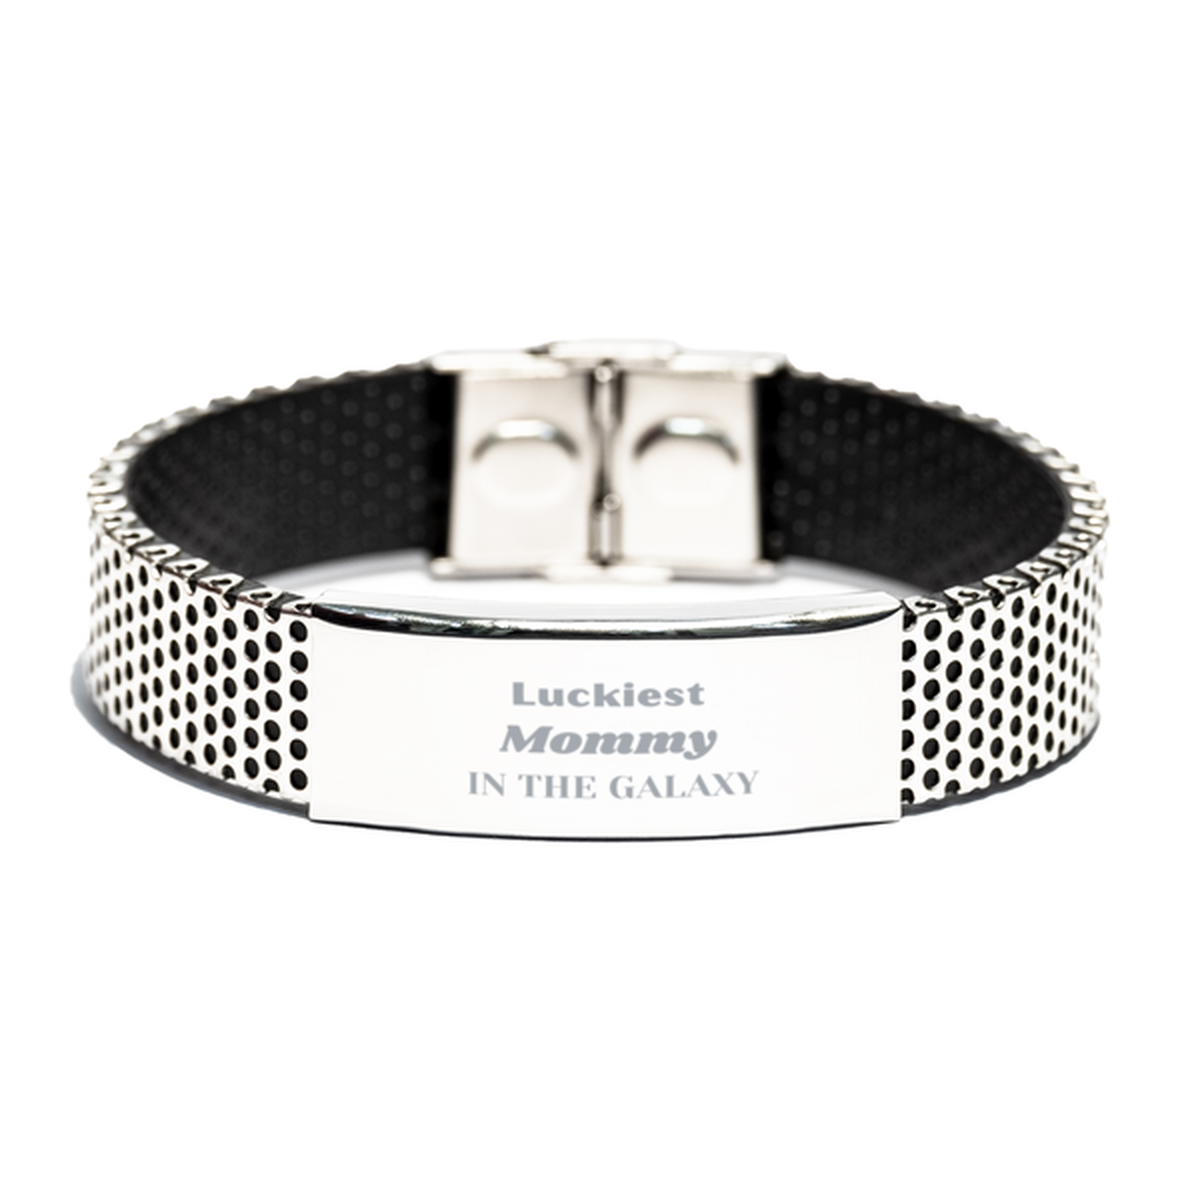 Luckiest Mommy in the Galaxy, To My Mommy Engraved Gifts, Christmas Mommy Stainless Steel Bracelet Gifts, X-mas Birthday Unique Gifts For Mommy Men Women